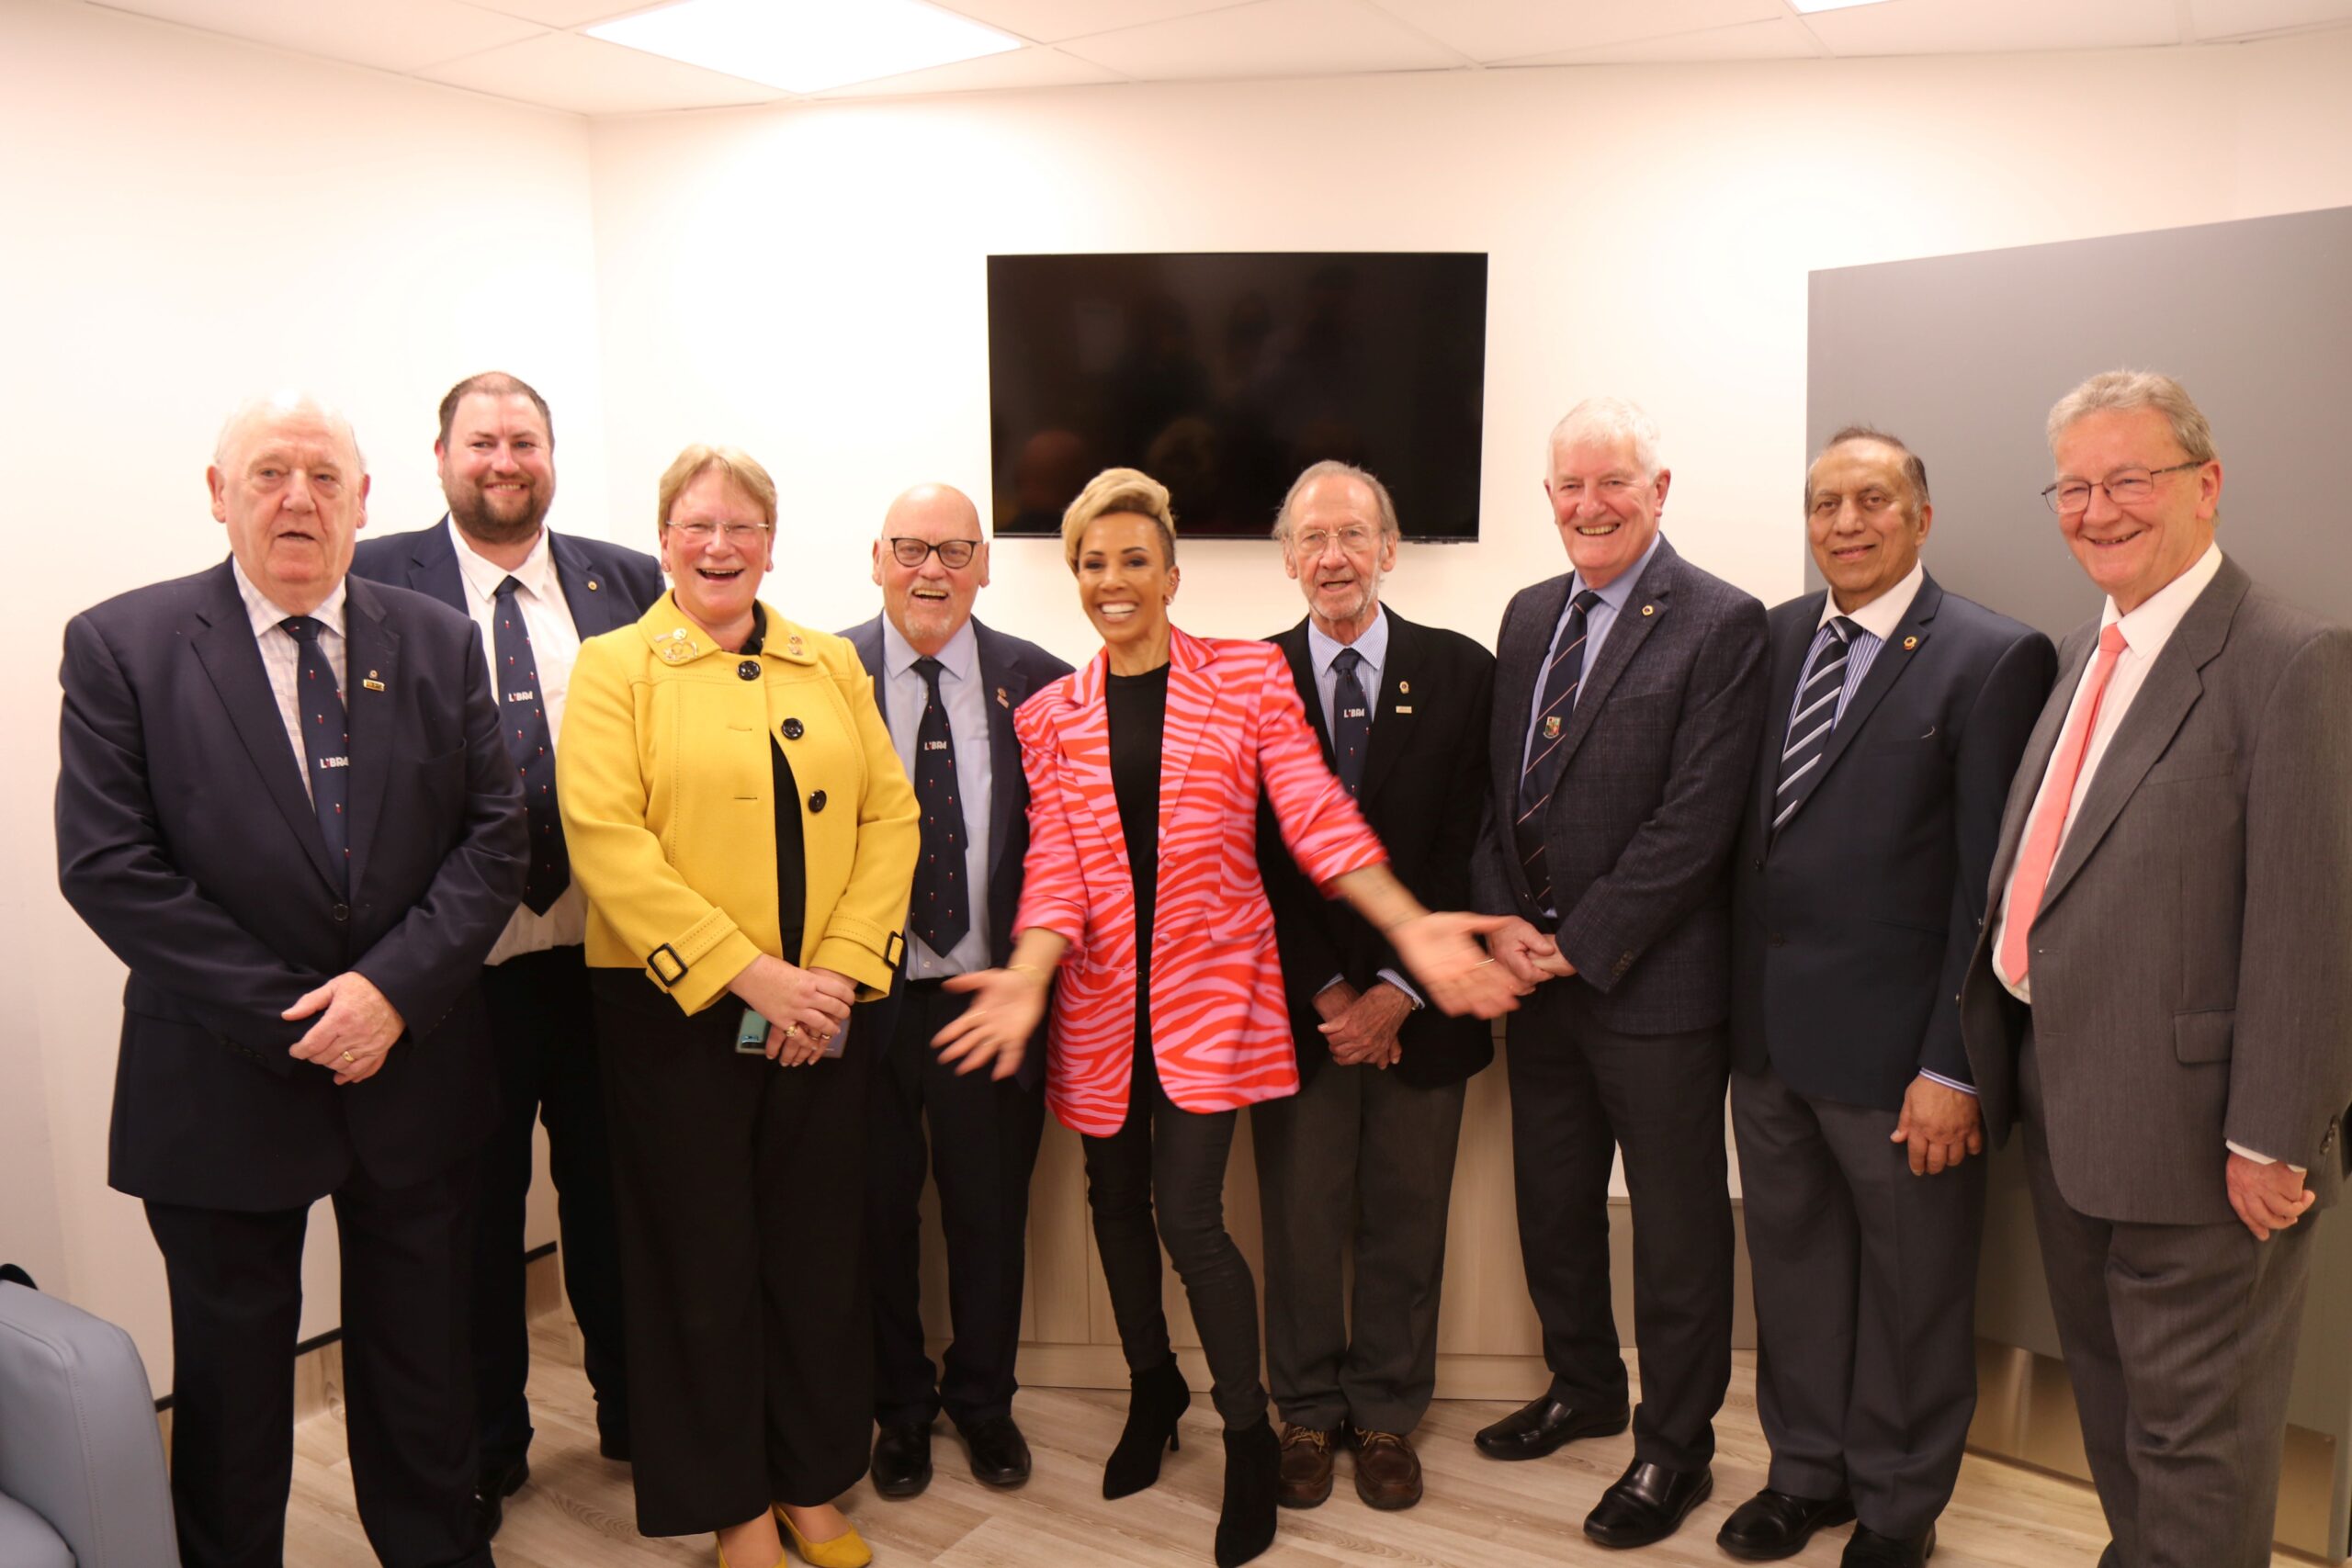 Dame Kelly Holmes Opens LIBRA Funded Blood Cancer Unit At King’s College Hospital